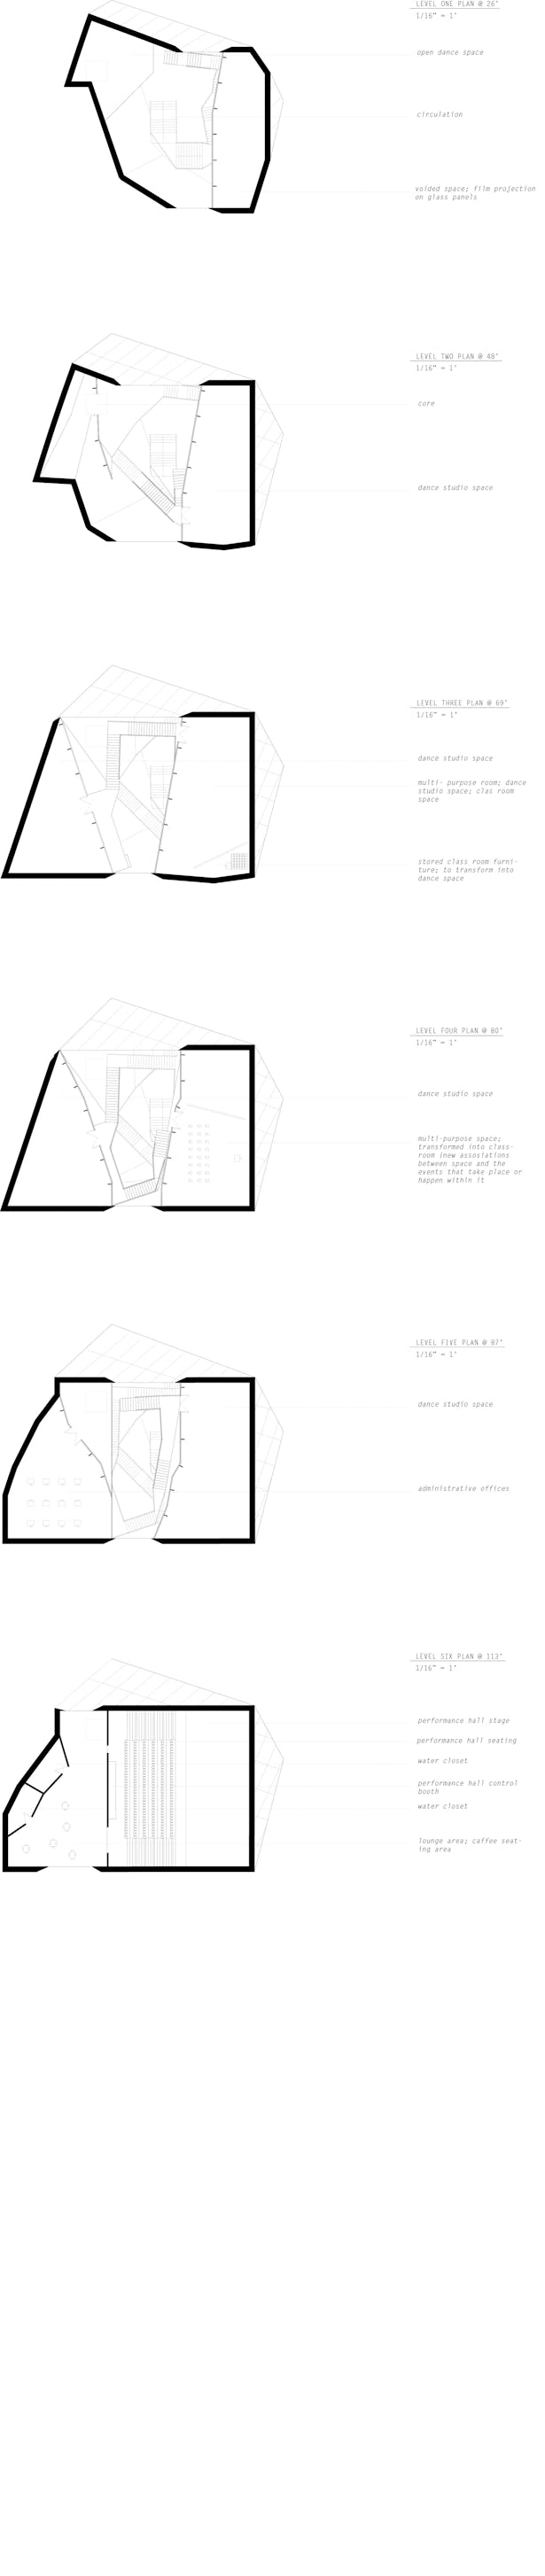 plan floor drawings and distribution of spaces